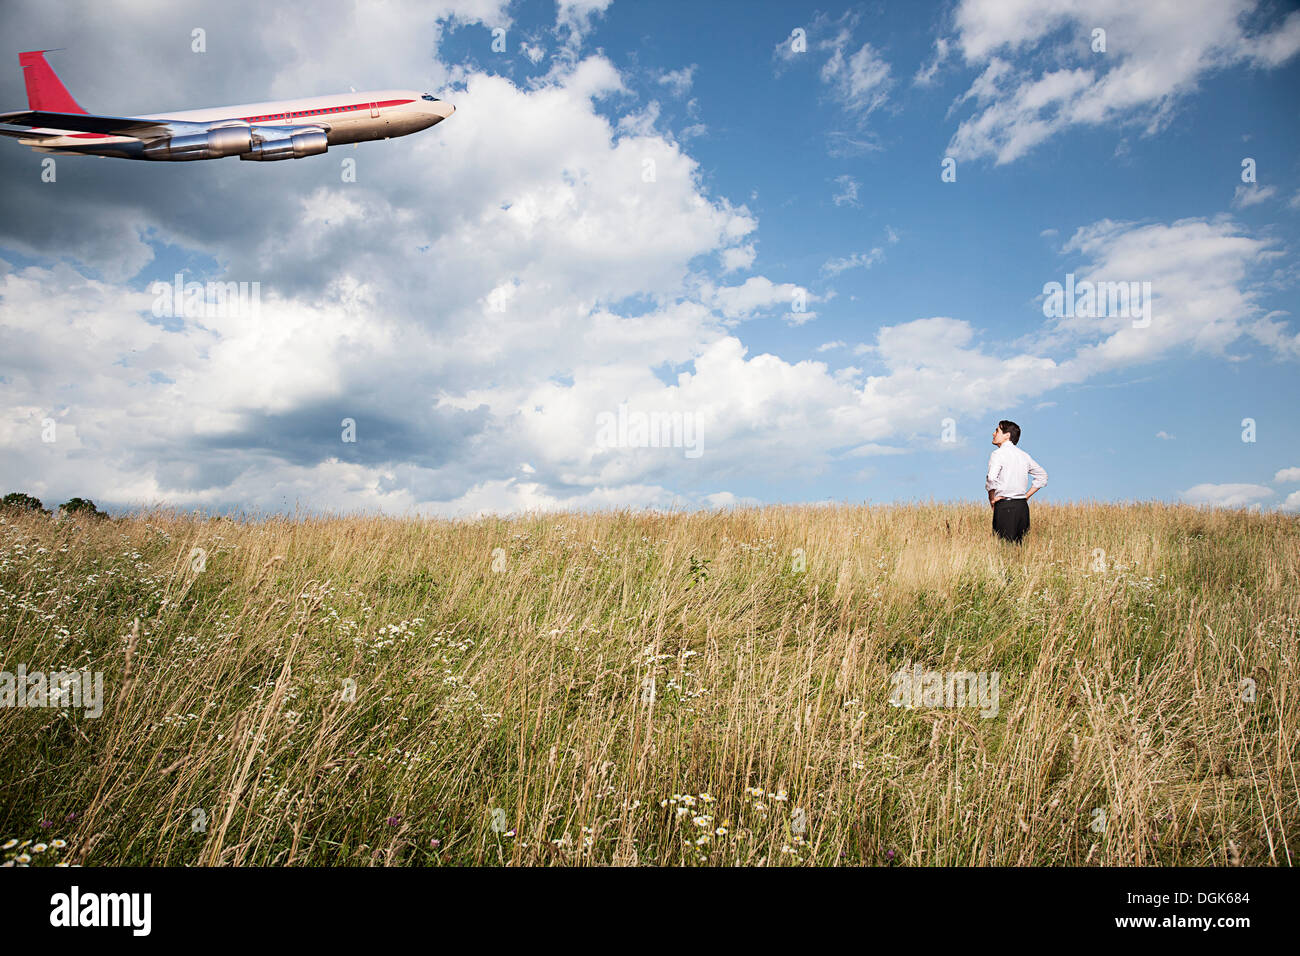 Businessman in field looking at airplane Stock Photo